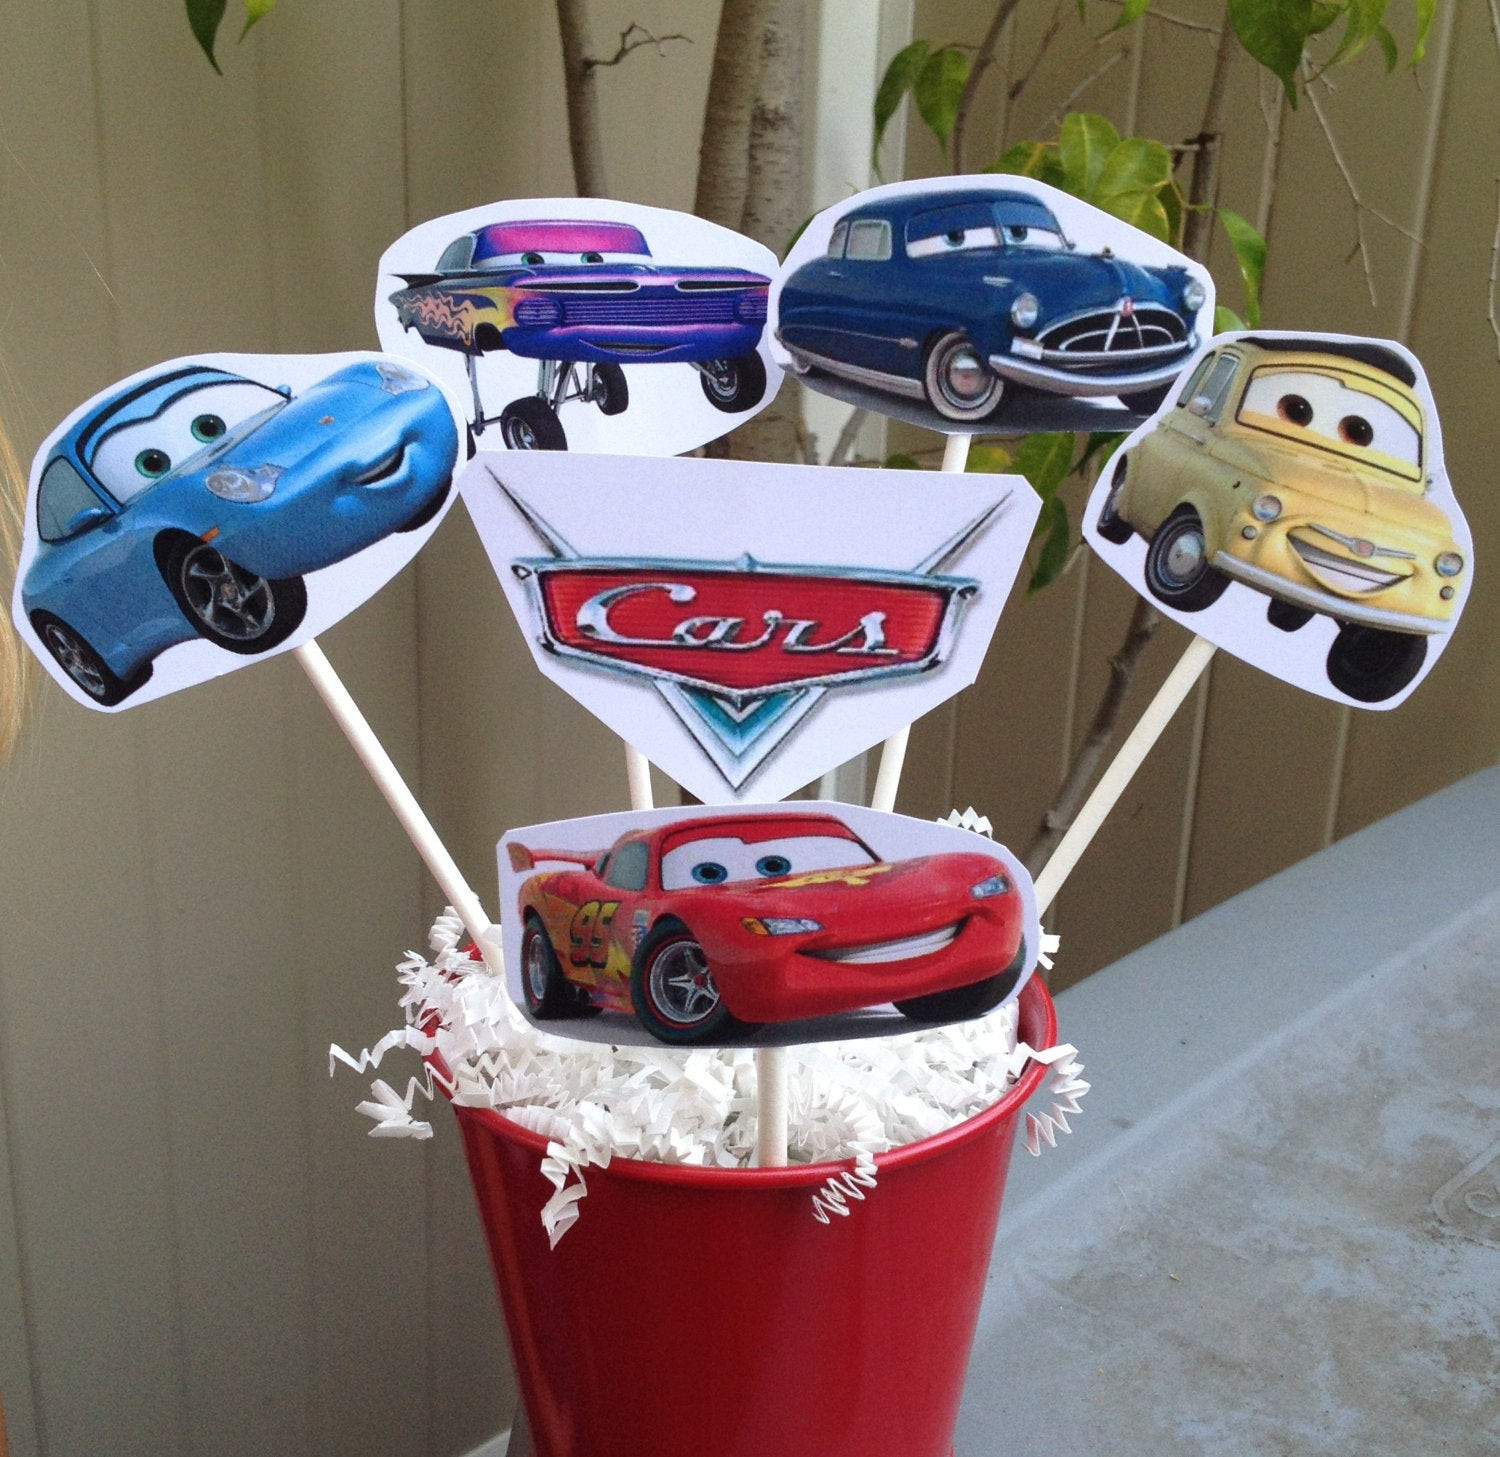 Disney Cars Birthday Decorations
 1 CARS Centerpiece Disney inspired CARS Party Decorations